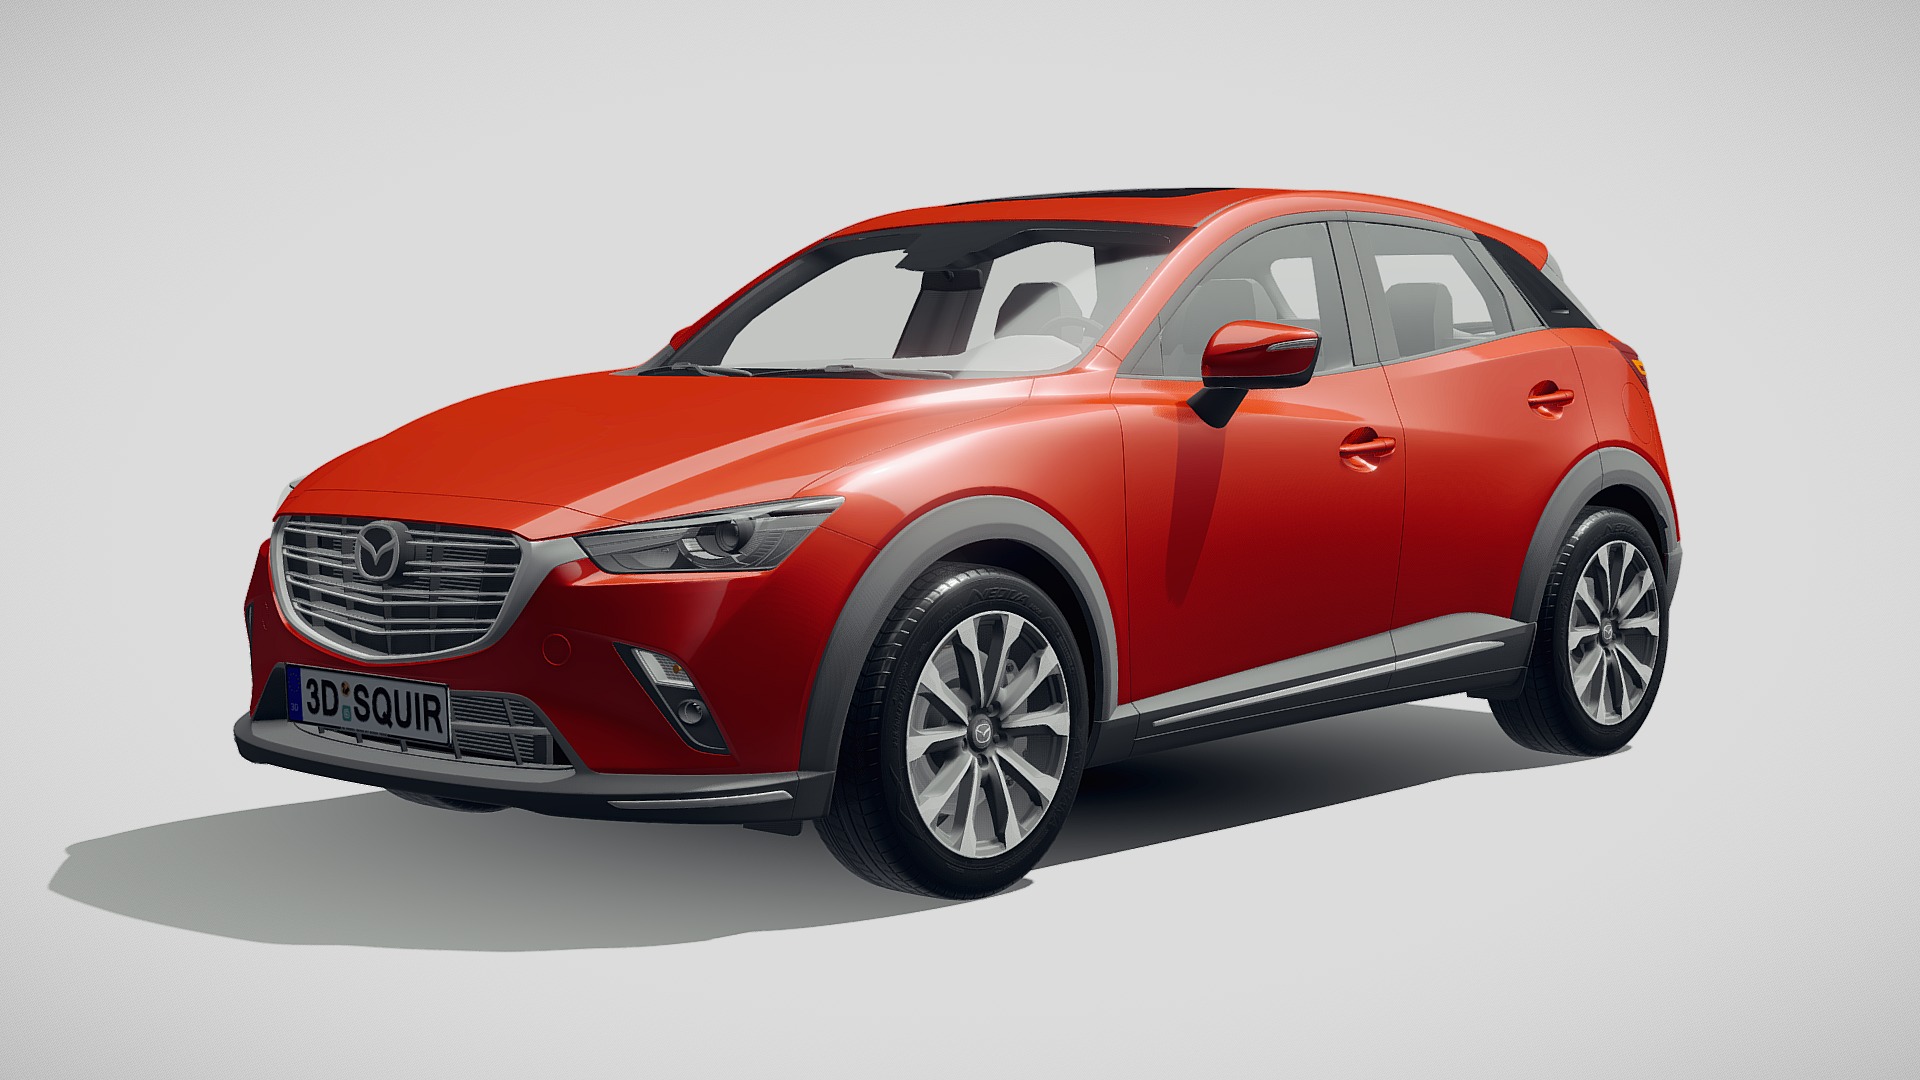 3D model Mazda CX-3 2019 - This is a 3D model of the Mazda CX-3 2019. The 3D model is about a red car with a white background.